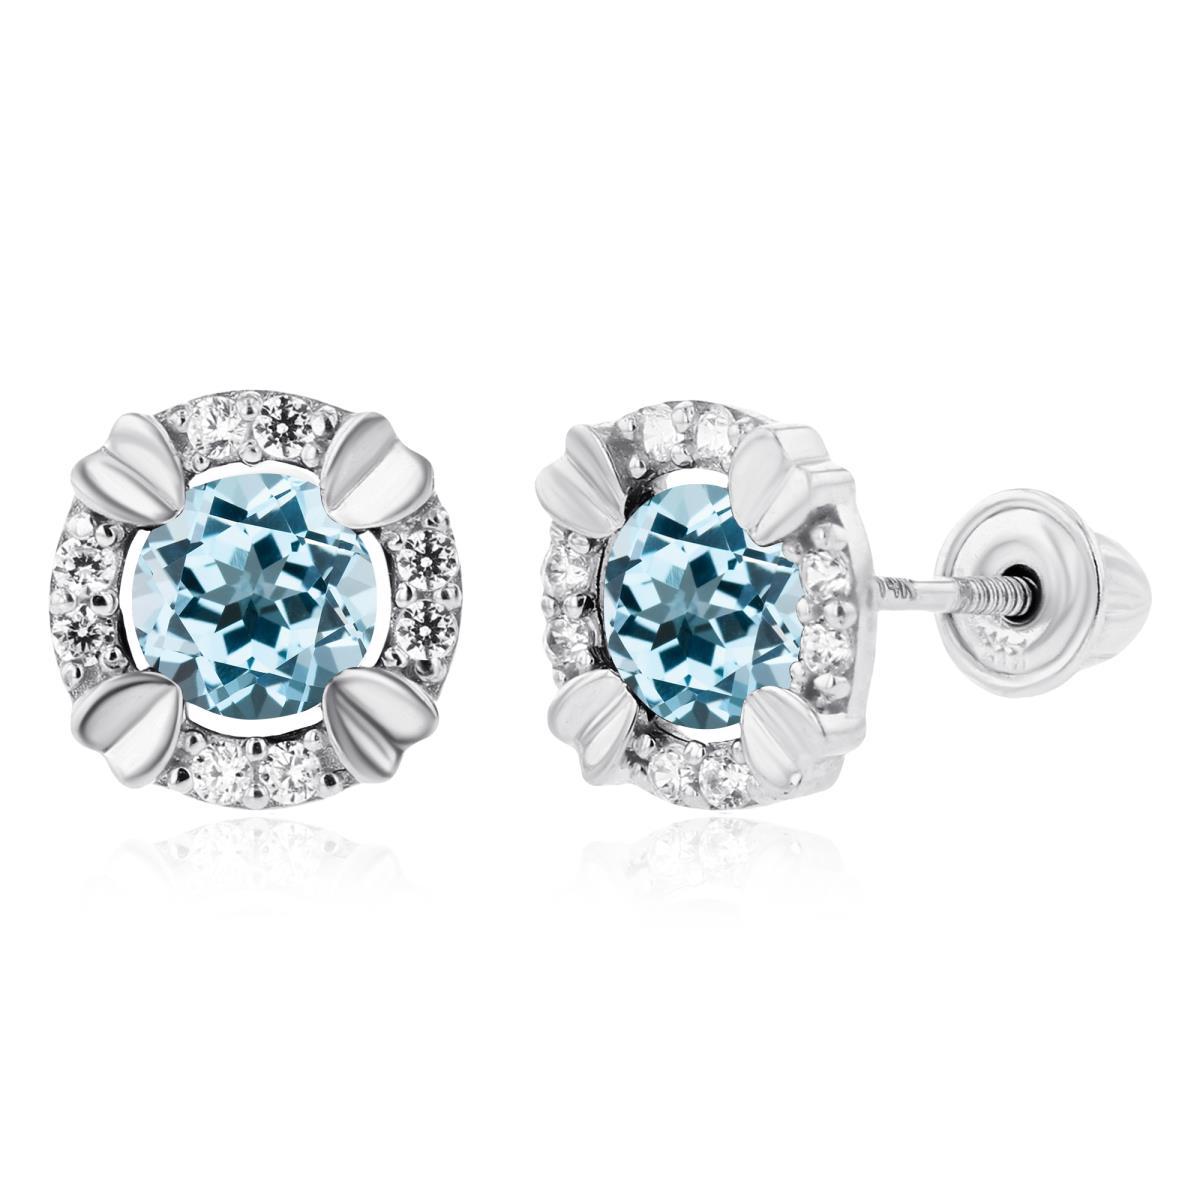 14K White Gold 4mm Round Sy Blue Topaz & 1mm Created White Sapphire Halo Screwback Earrings